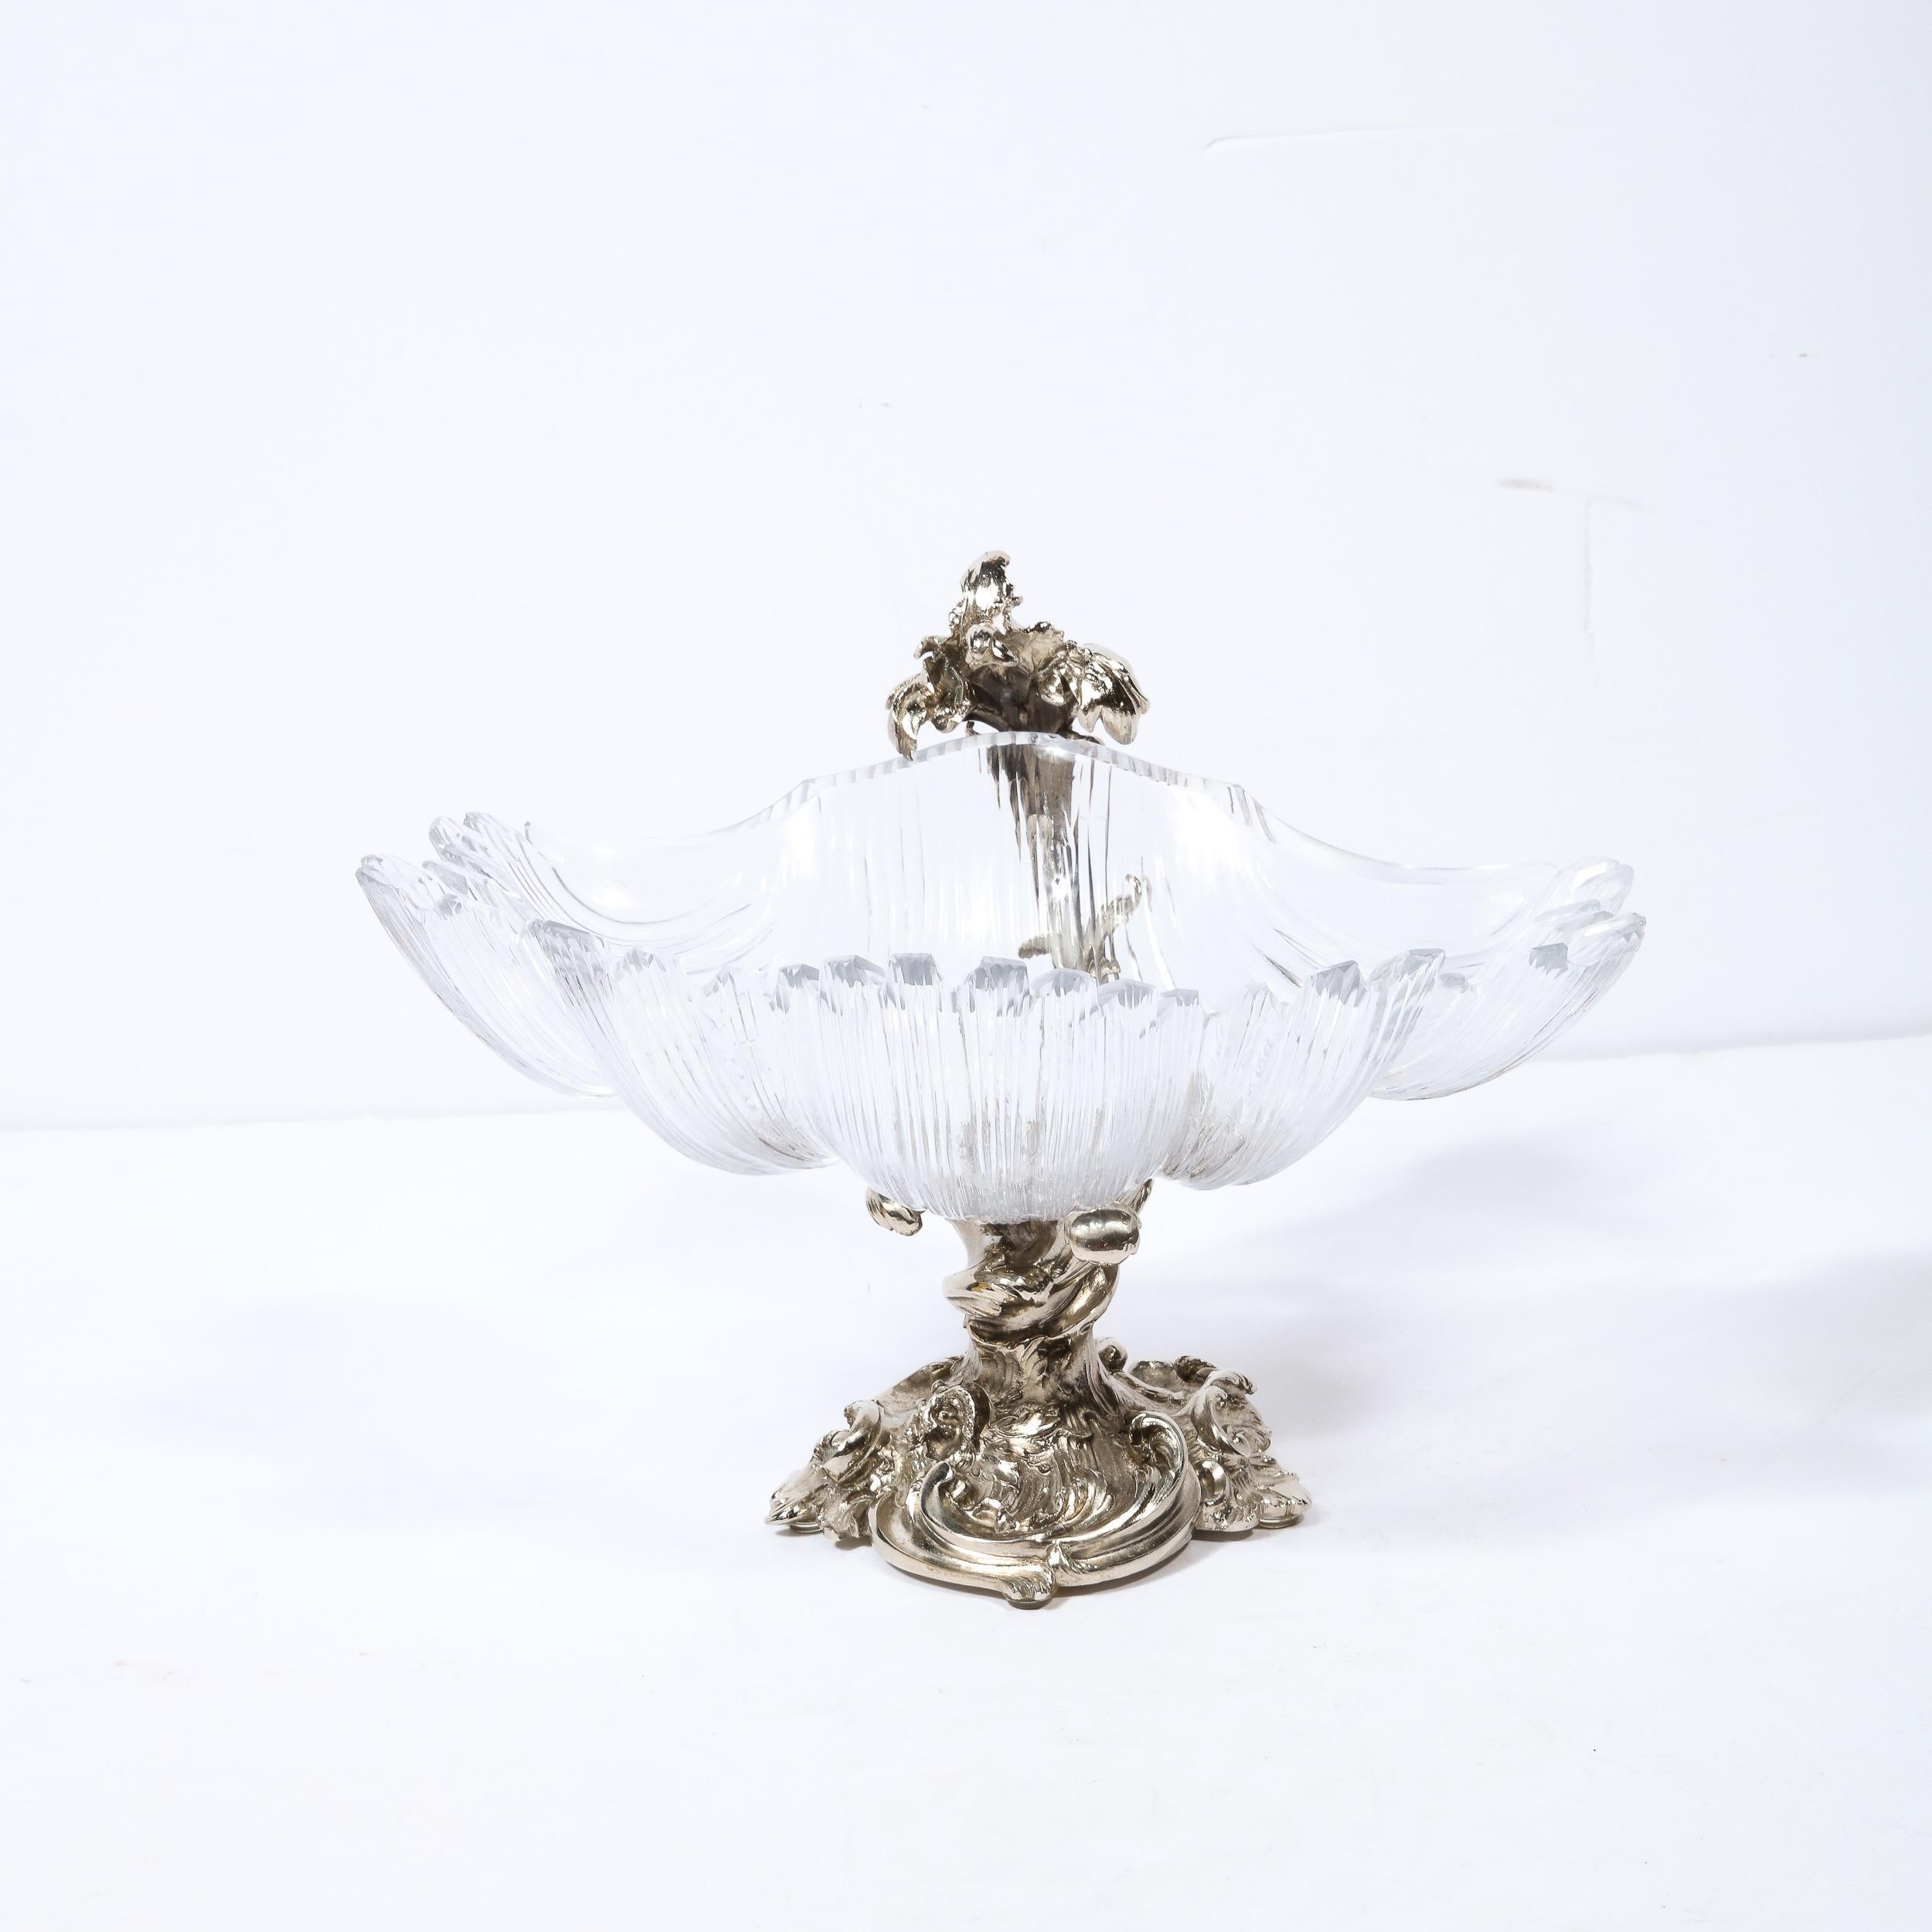 This elegant stylized shell bowl was realized by the illustrious atelier of Les Freres in France during the 19th century. It offers a stylized silvered ormolu footed base with abstract swirling forms suggestive of troubled sea waters and waves